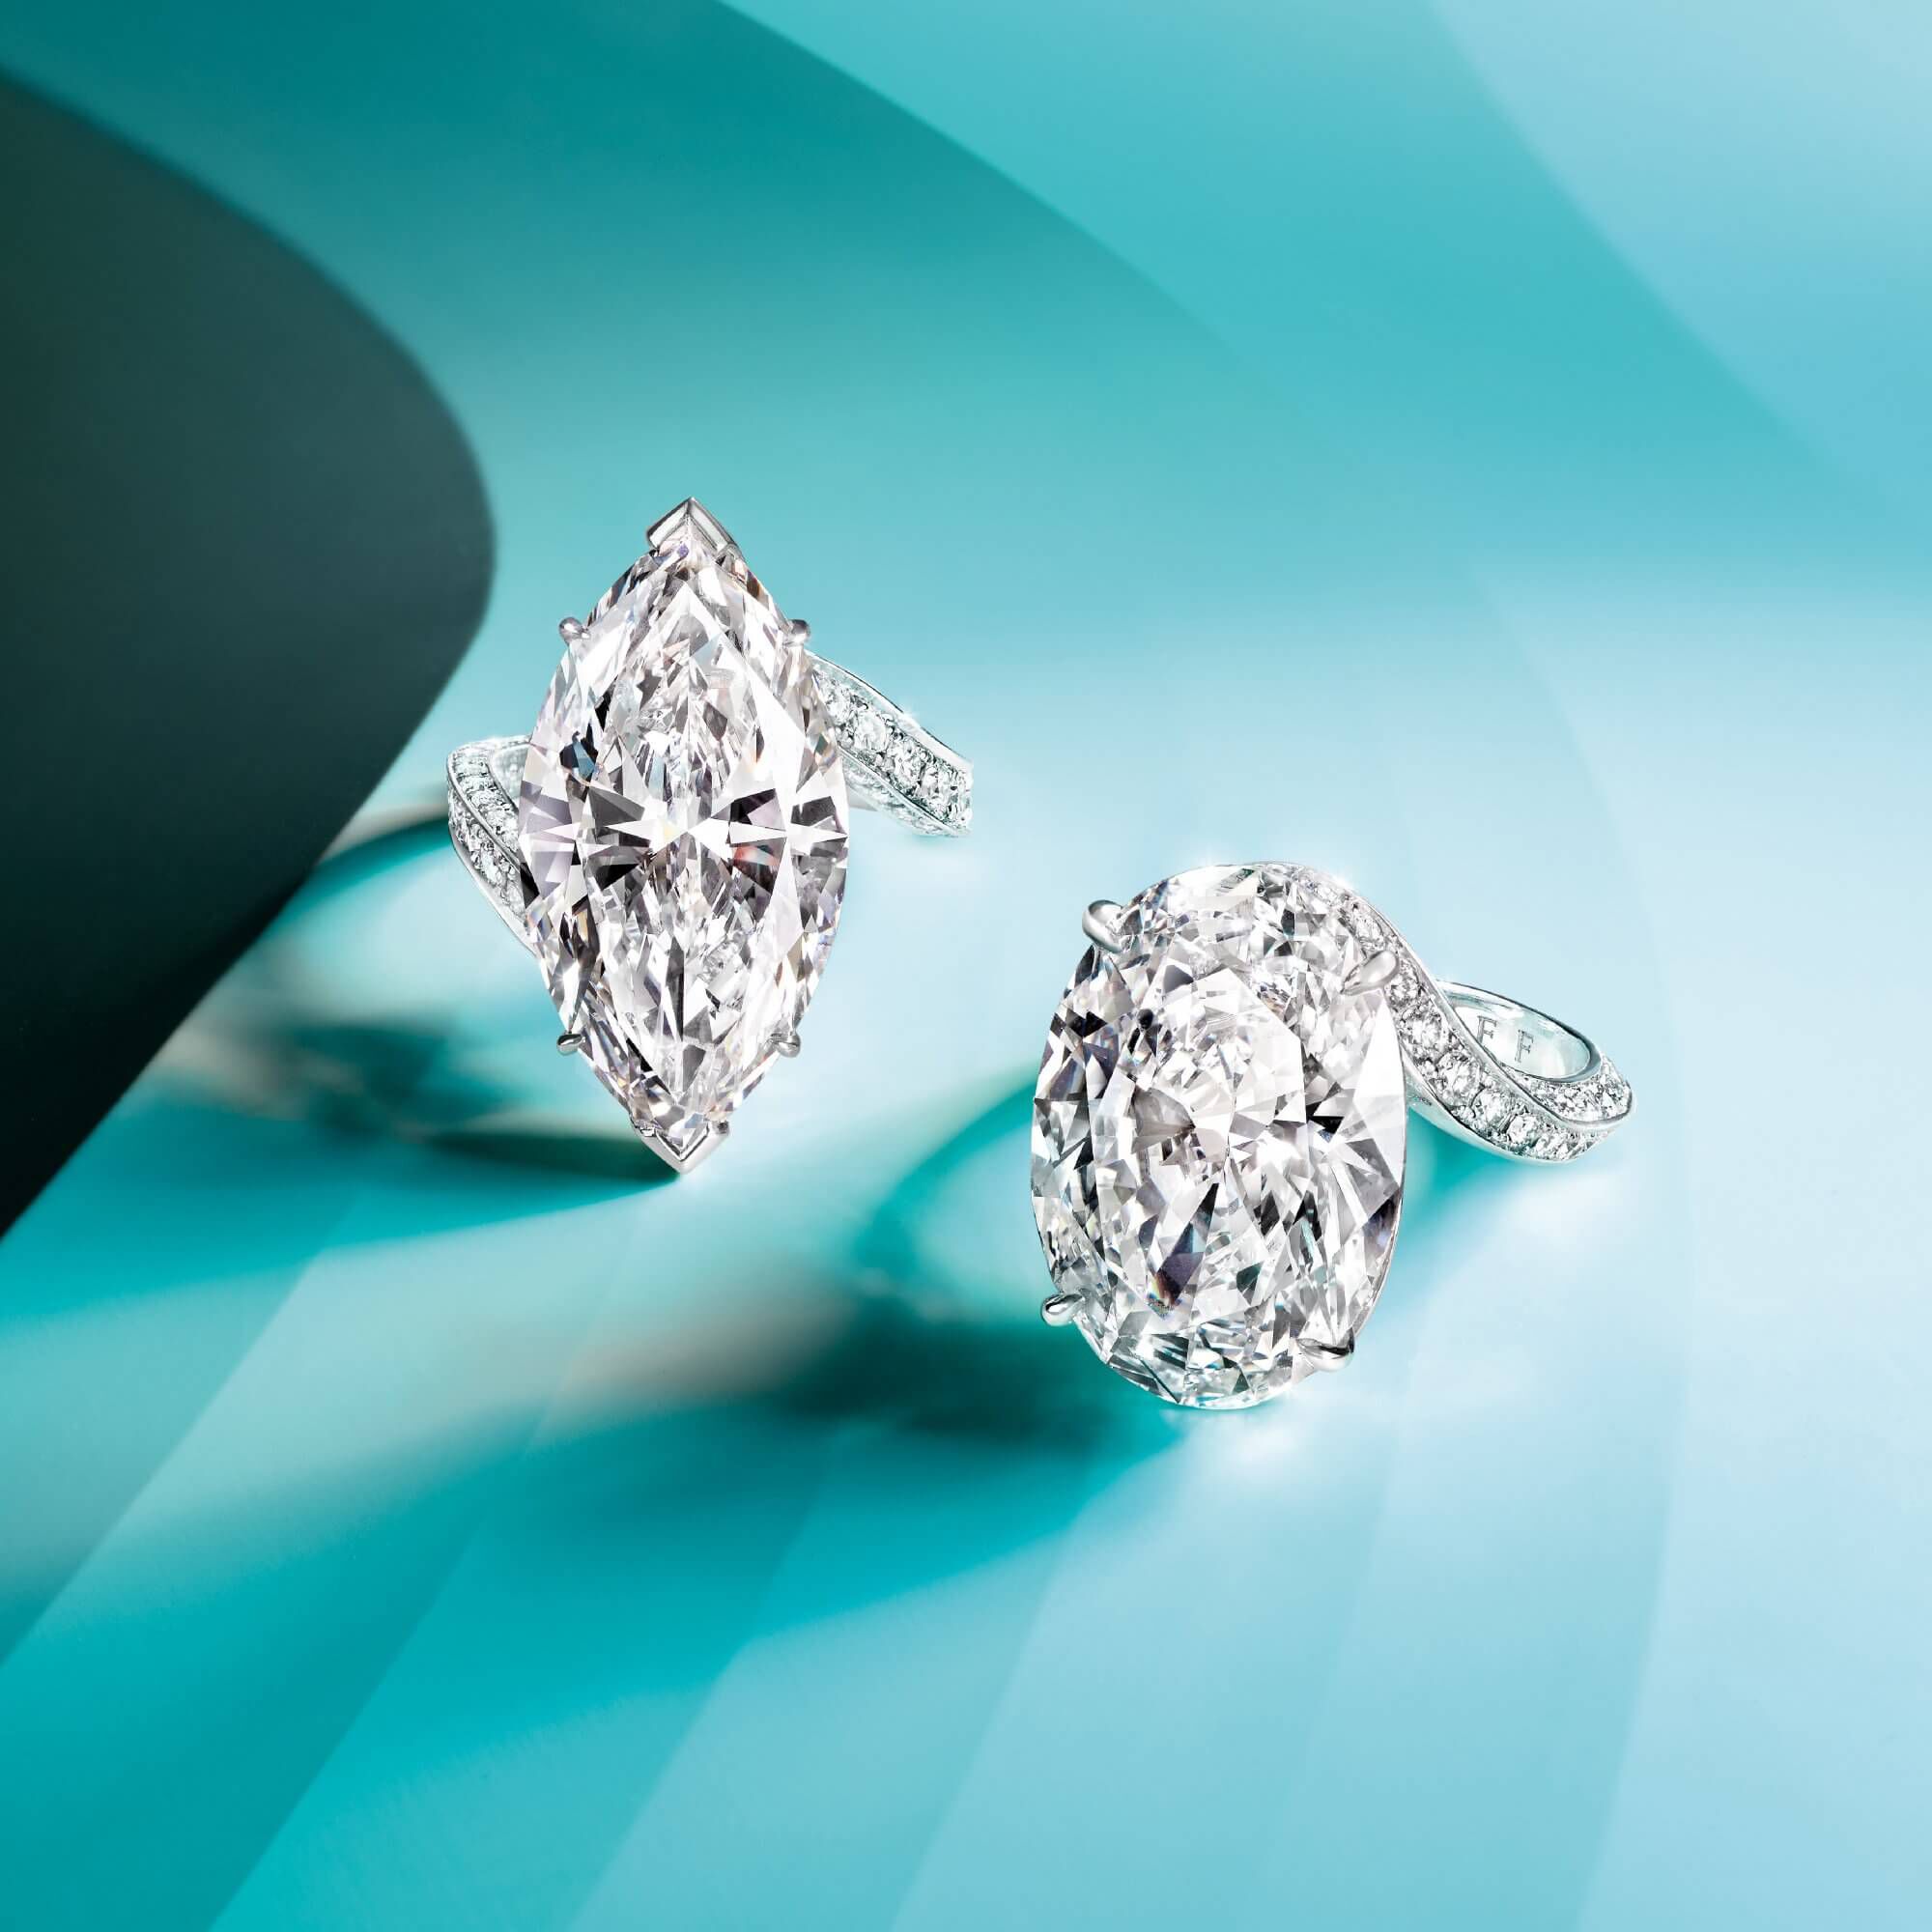 Two Graff diamond rings featuring a marquise shape diamond and an oval shape diamond respectively